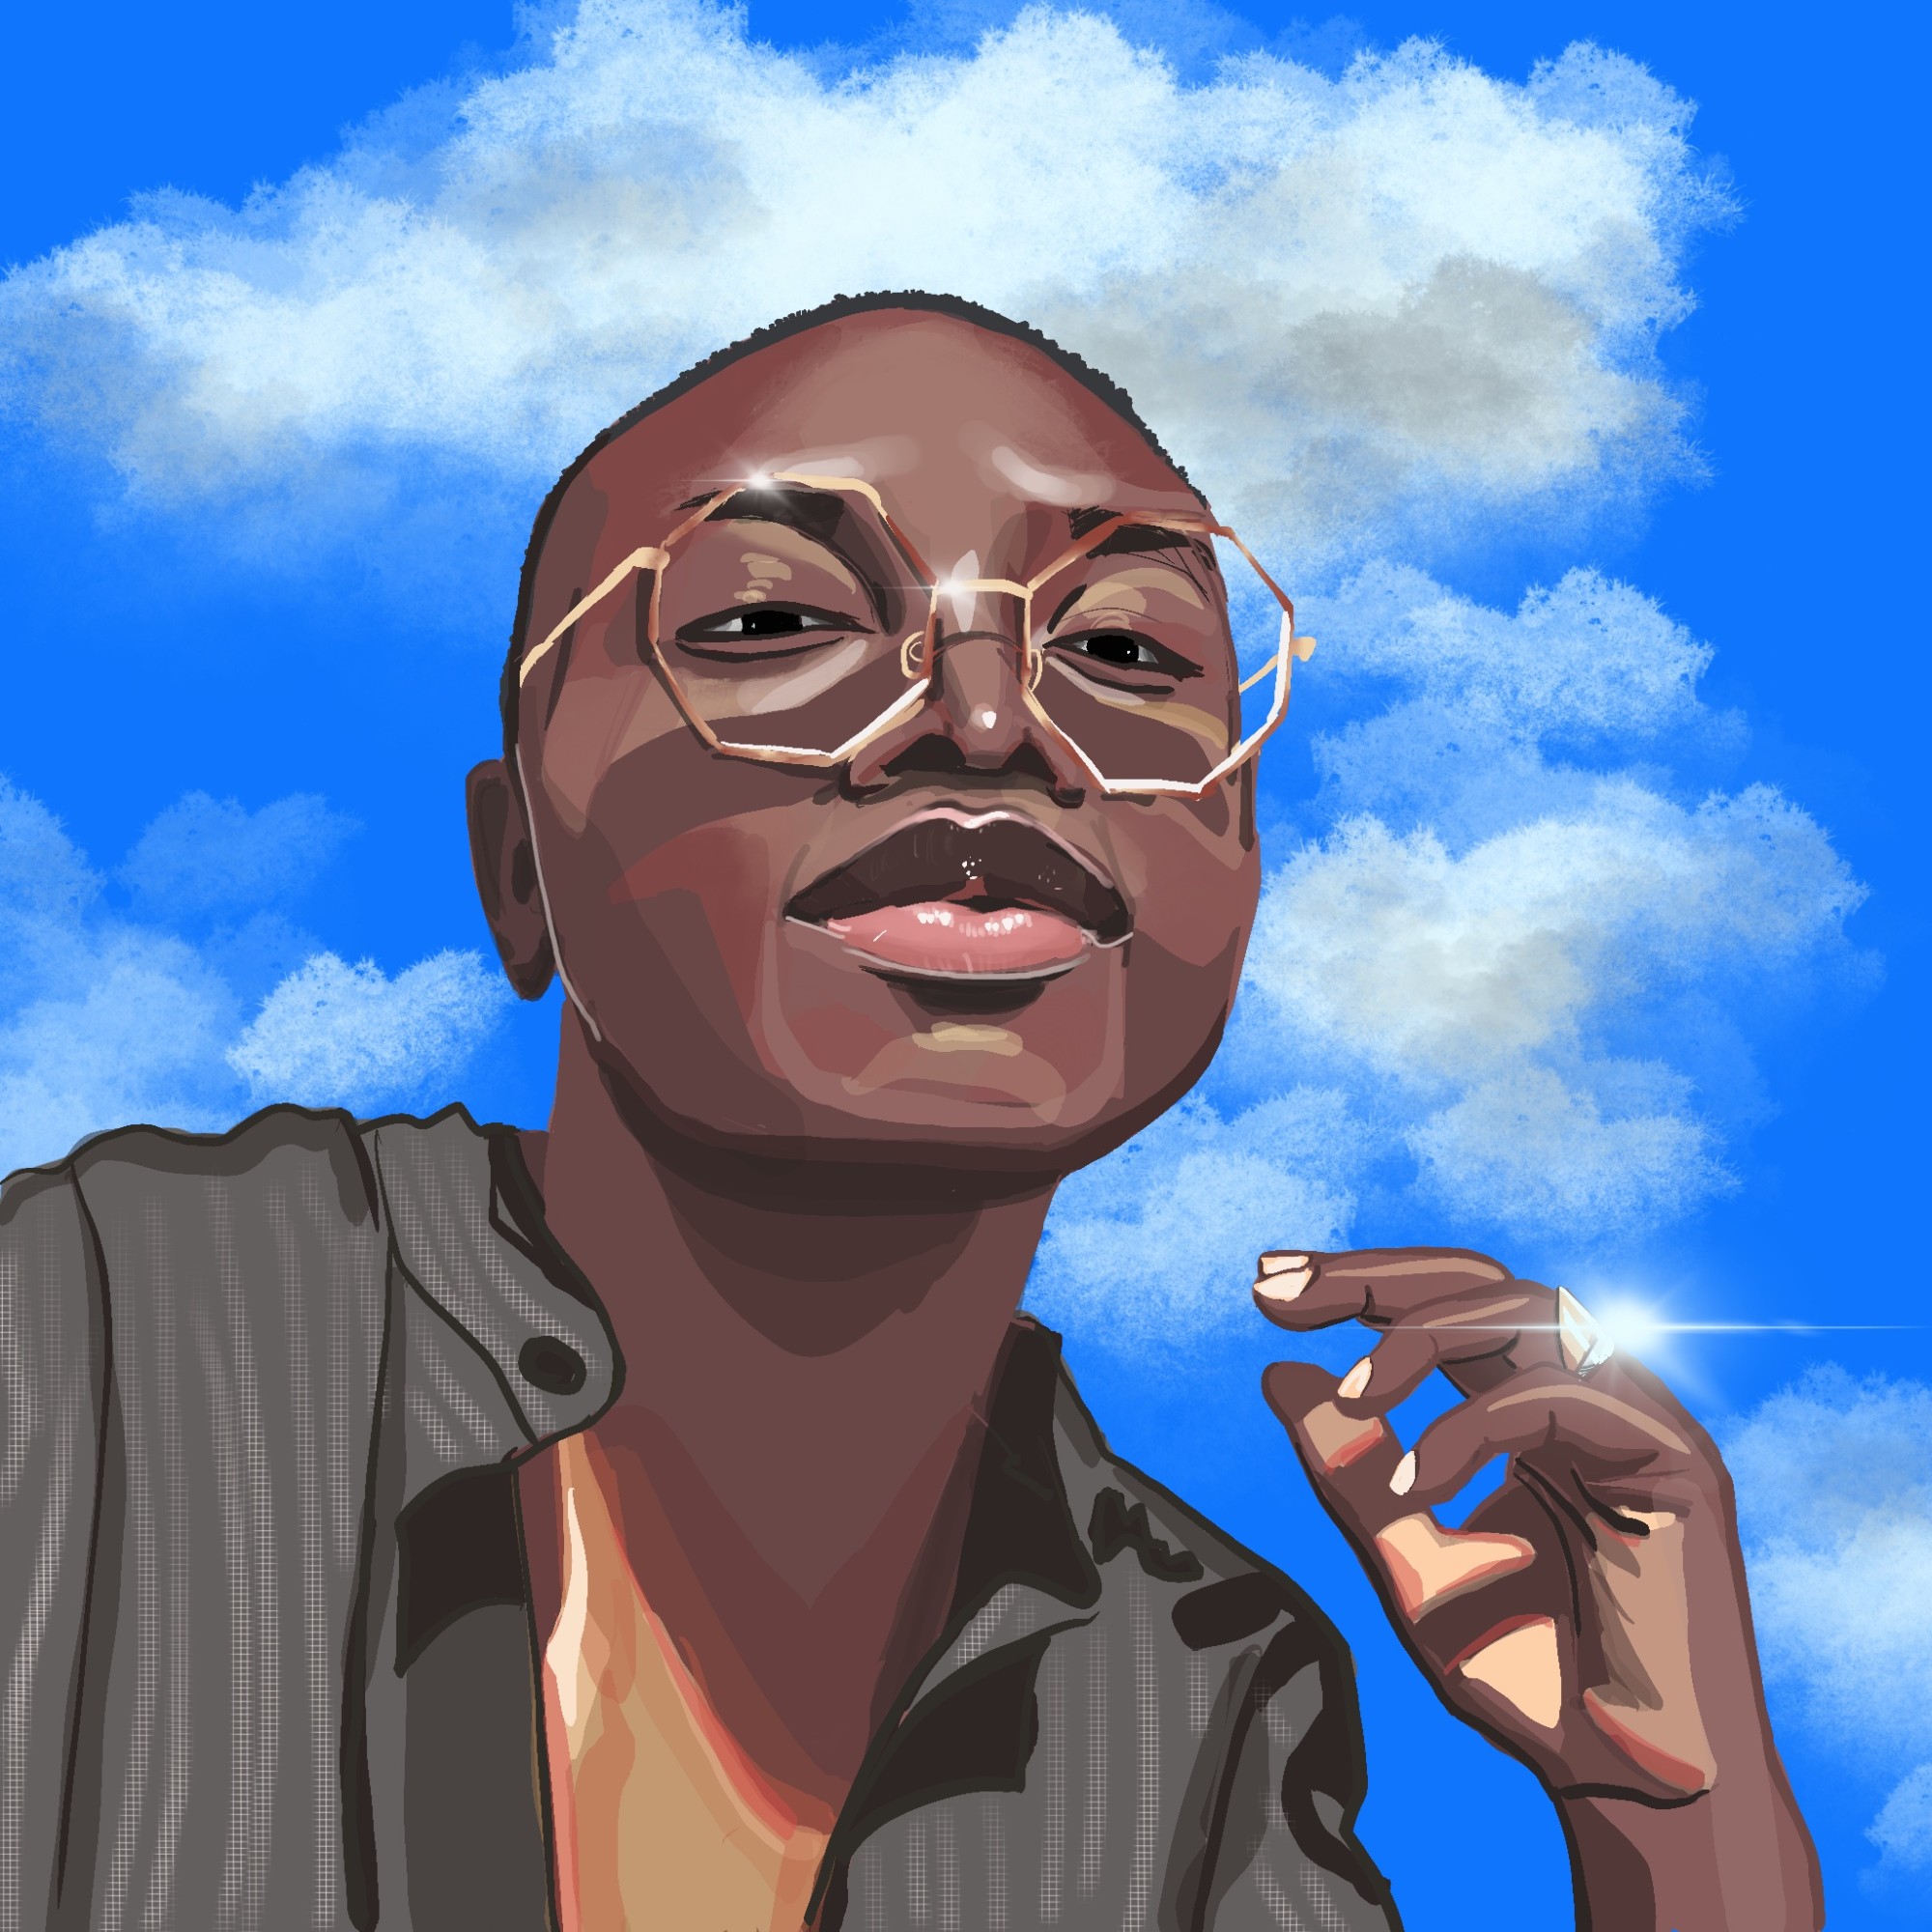 Digital illustration of the author beneath clouds and blue sky.